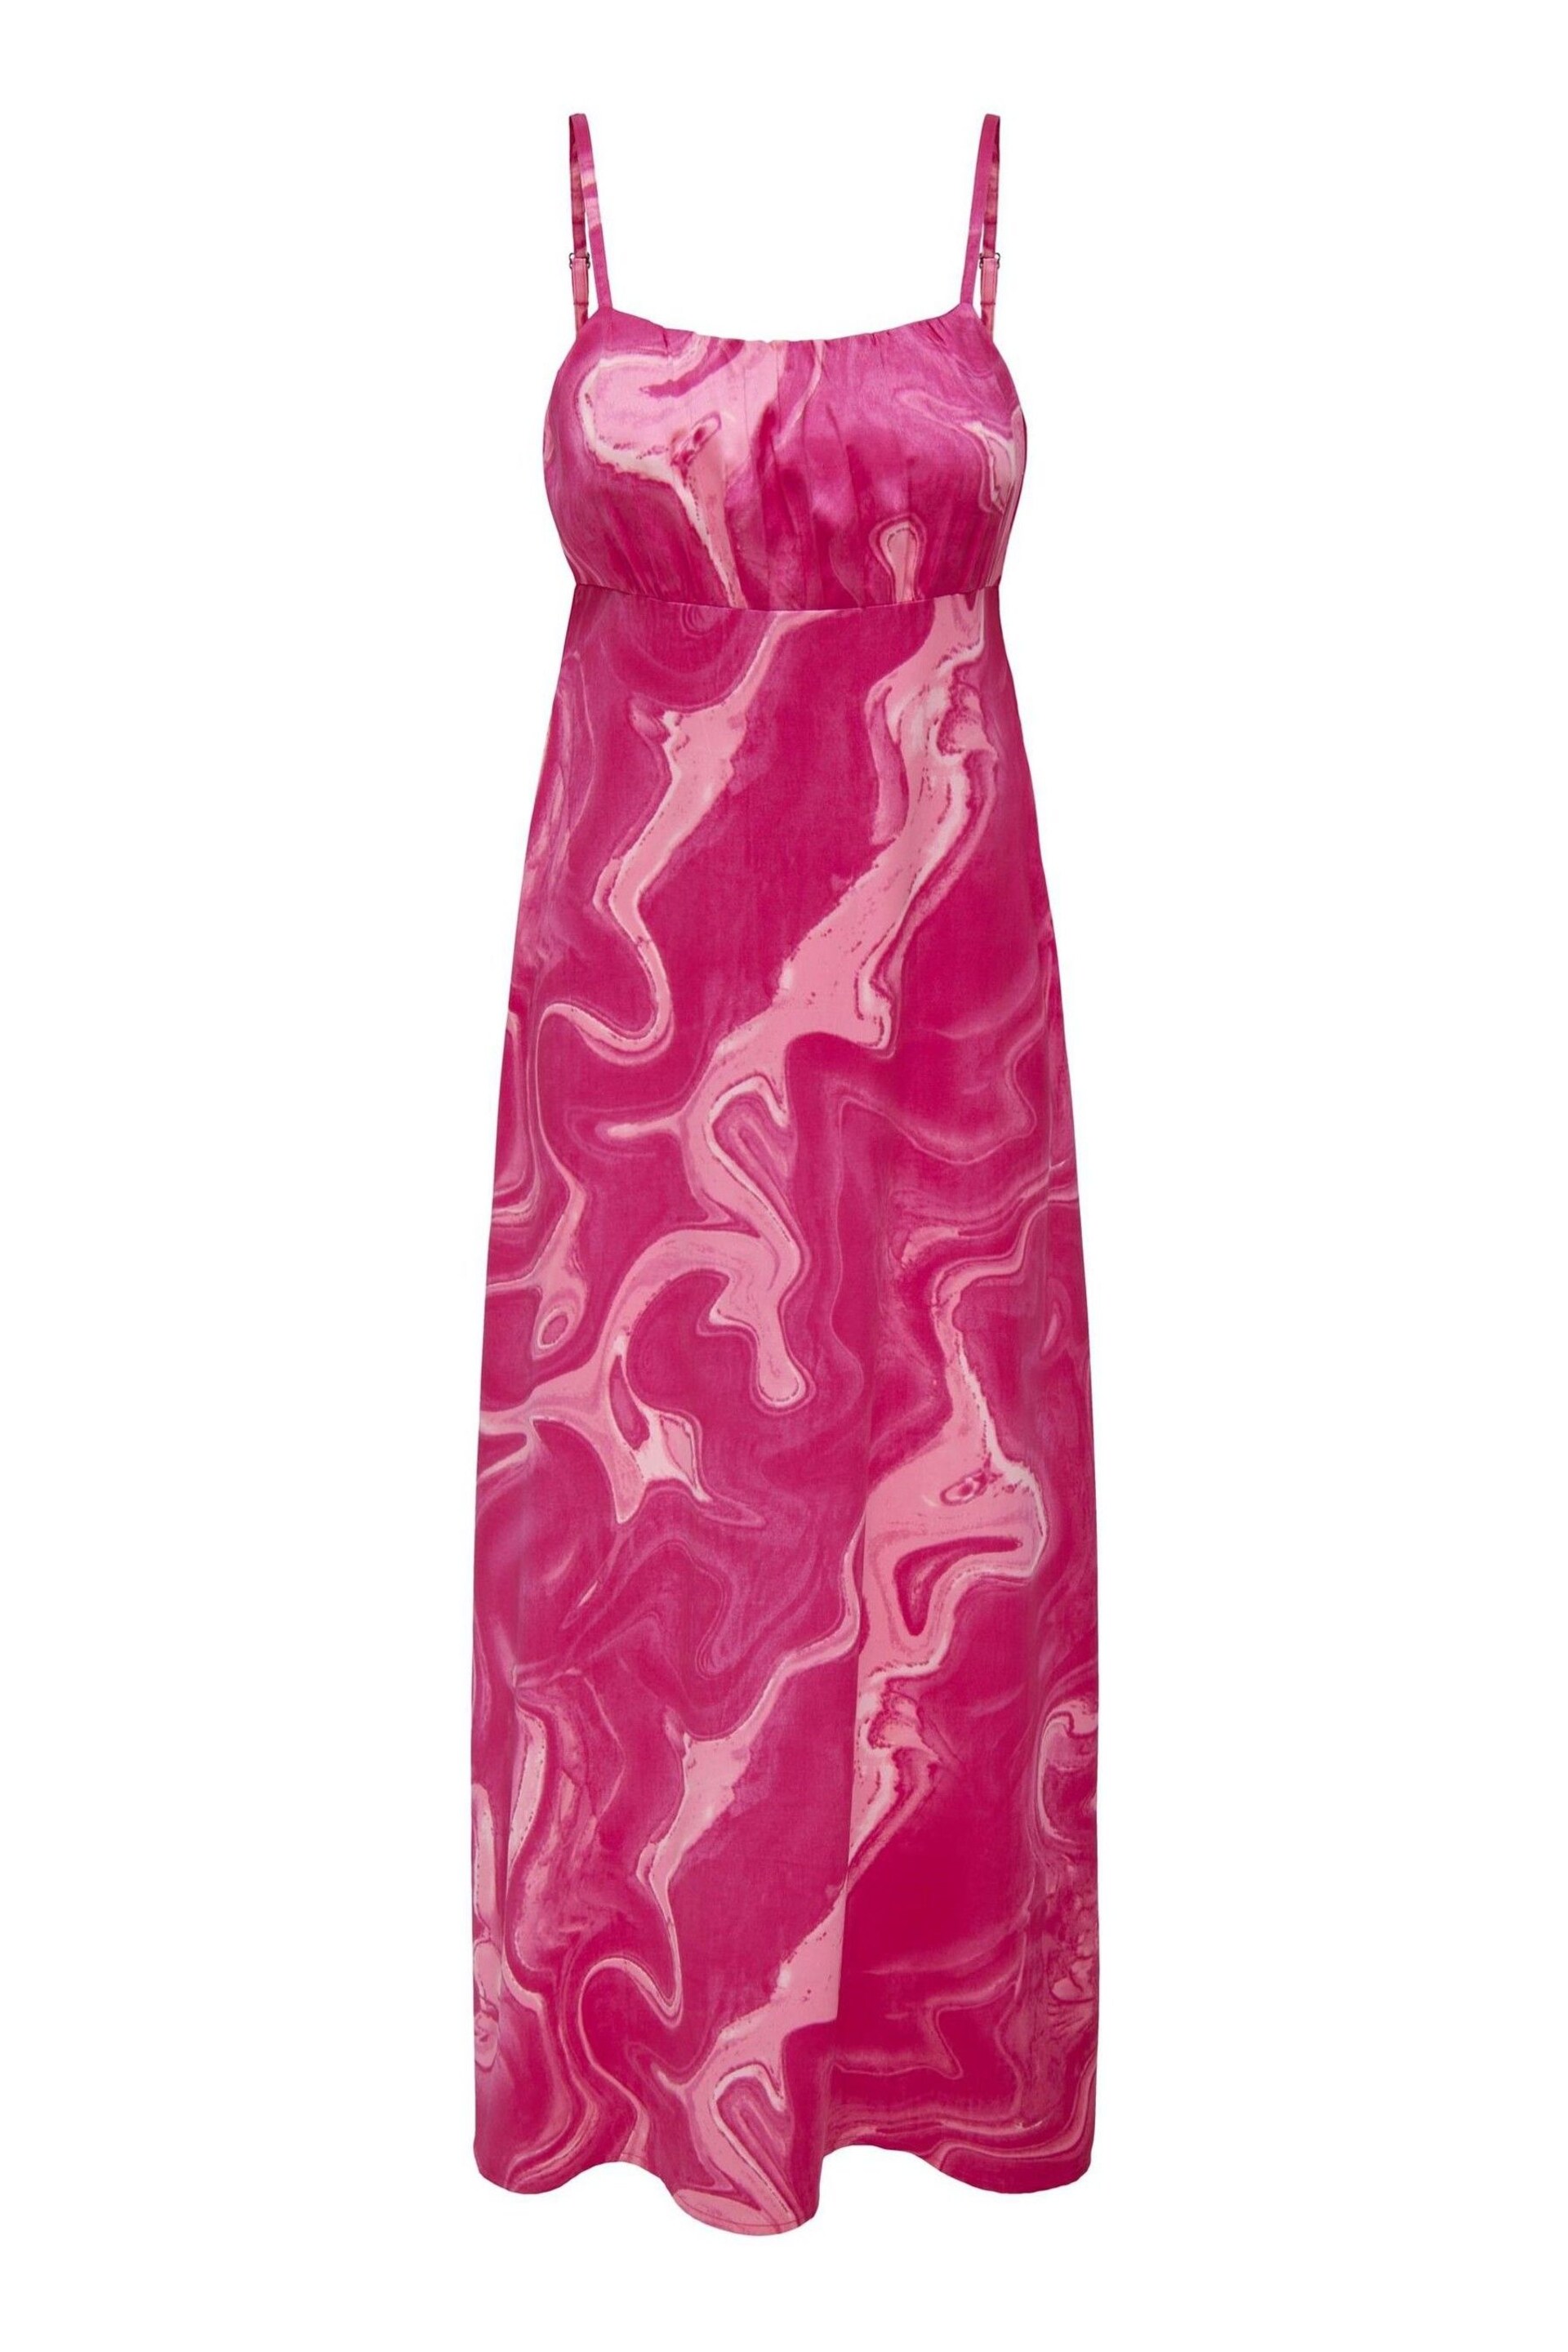 ONLY Pink Marble Print Cami Ruched Detail Midi Dress - Image 4 of 5